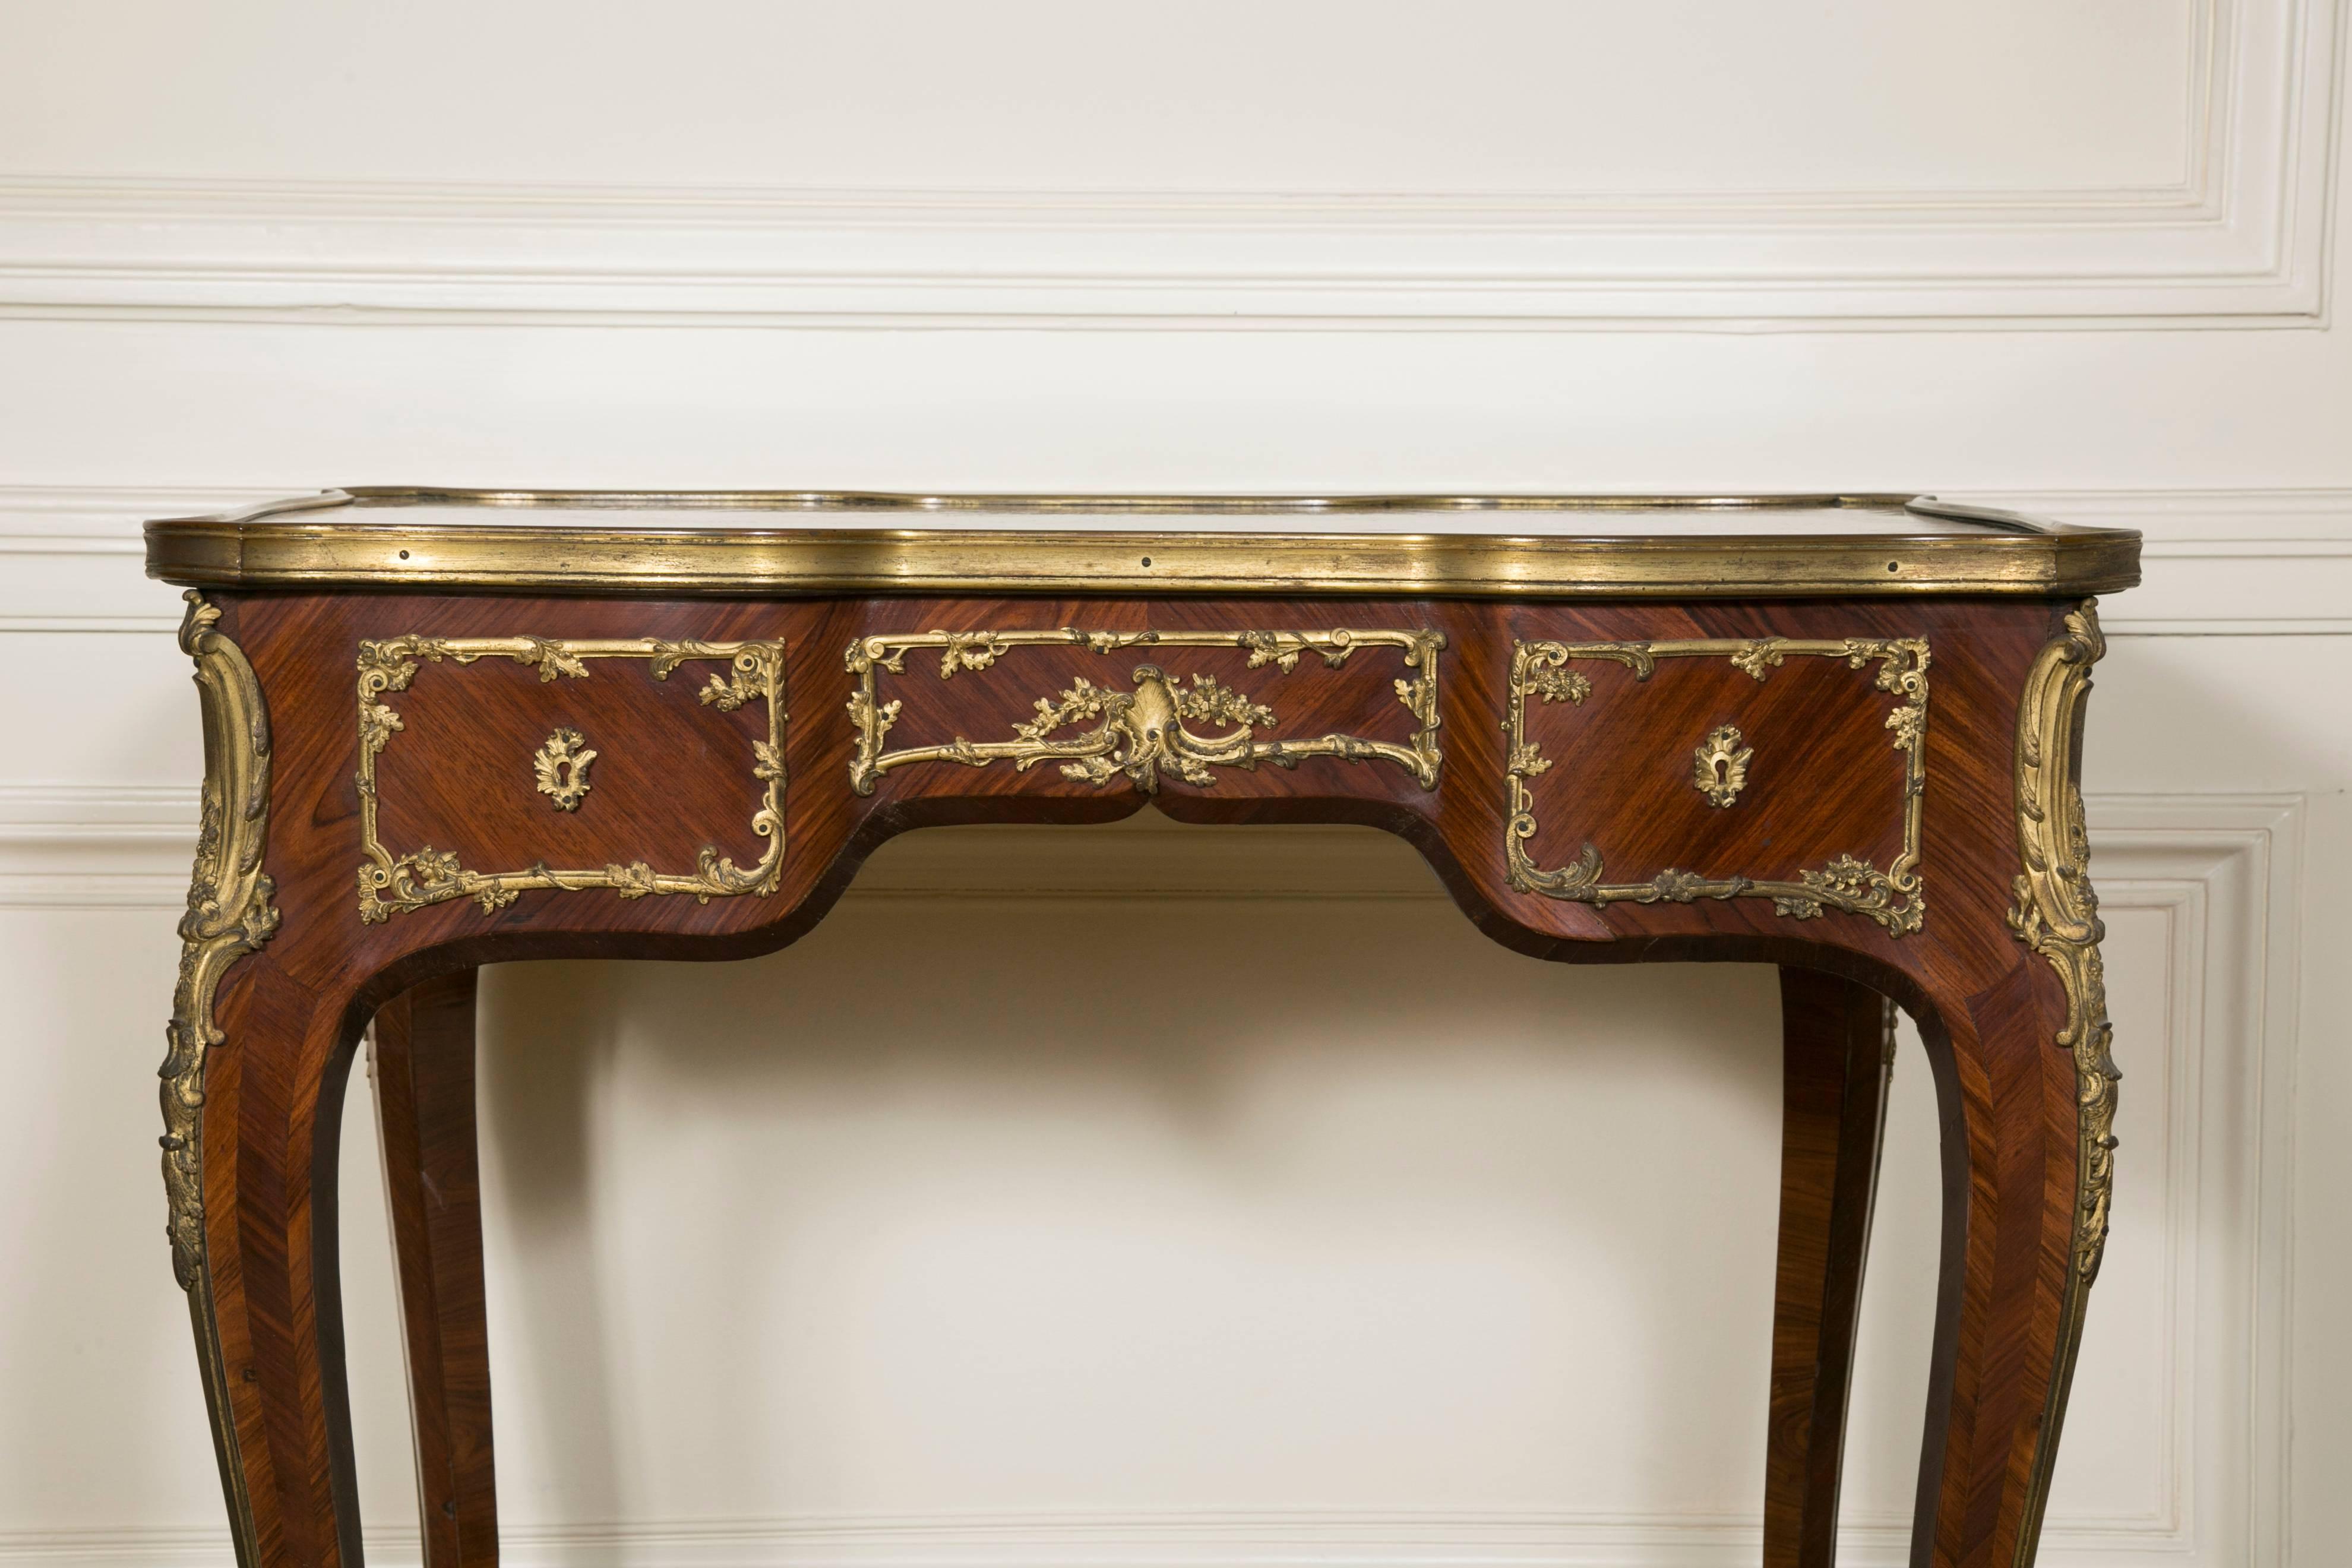 Very fine and beautifully executed model of a 19th century French Belle Époque LXV style, kingwood marquetry and ormolu-mounted table signed from V. Raulin, 226 Boulevard Saint Germain in Paris, known for the quality of his production and part of